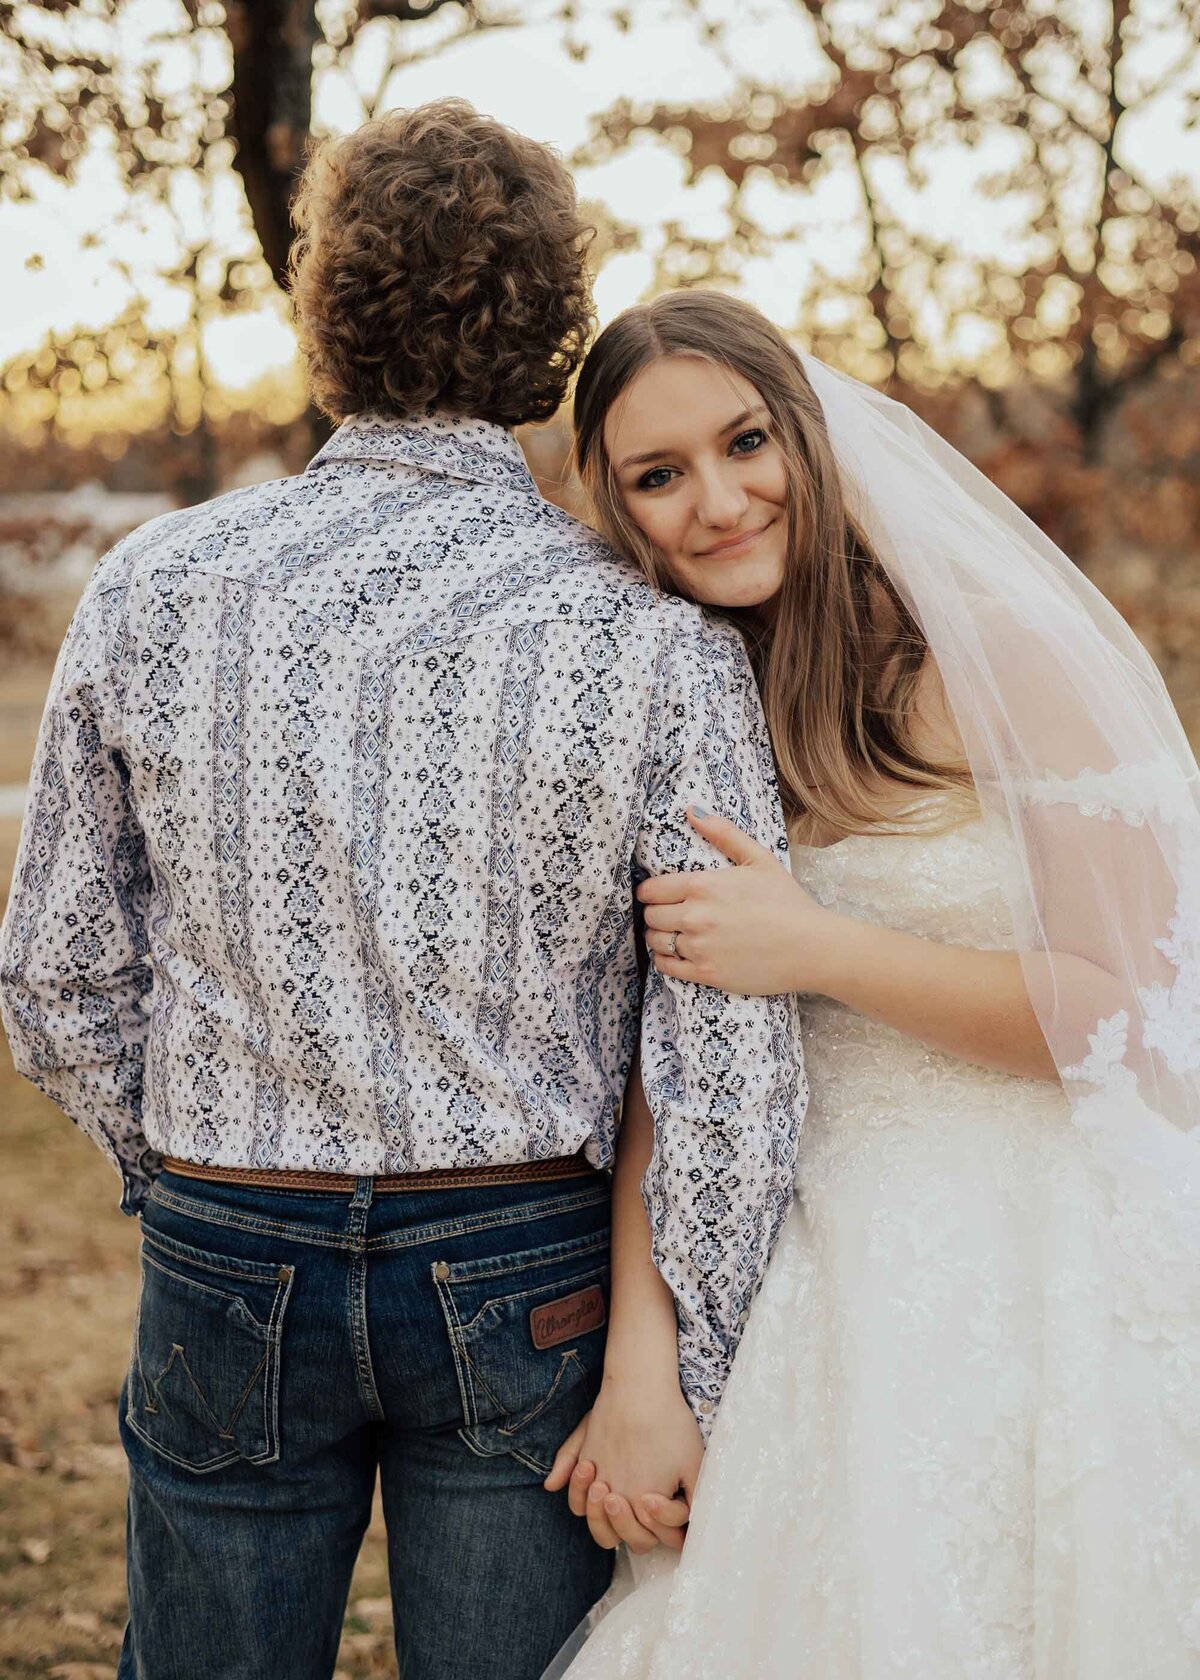 Maddie Rae Photography bride and groom standing side by side holding hands. he is facing away and she is facing the camera smiling. she is holding his arm with her other hand